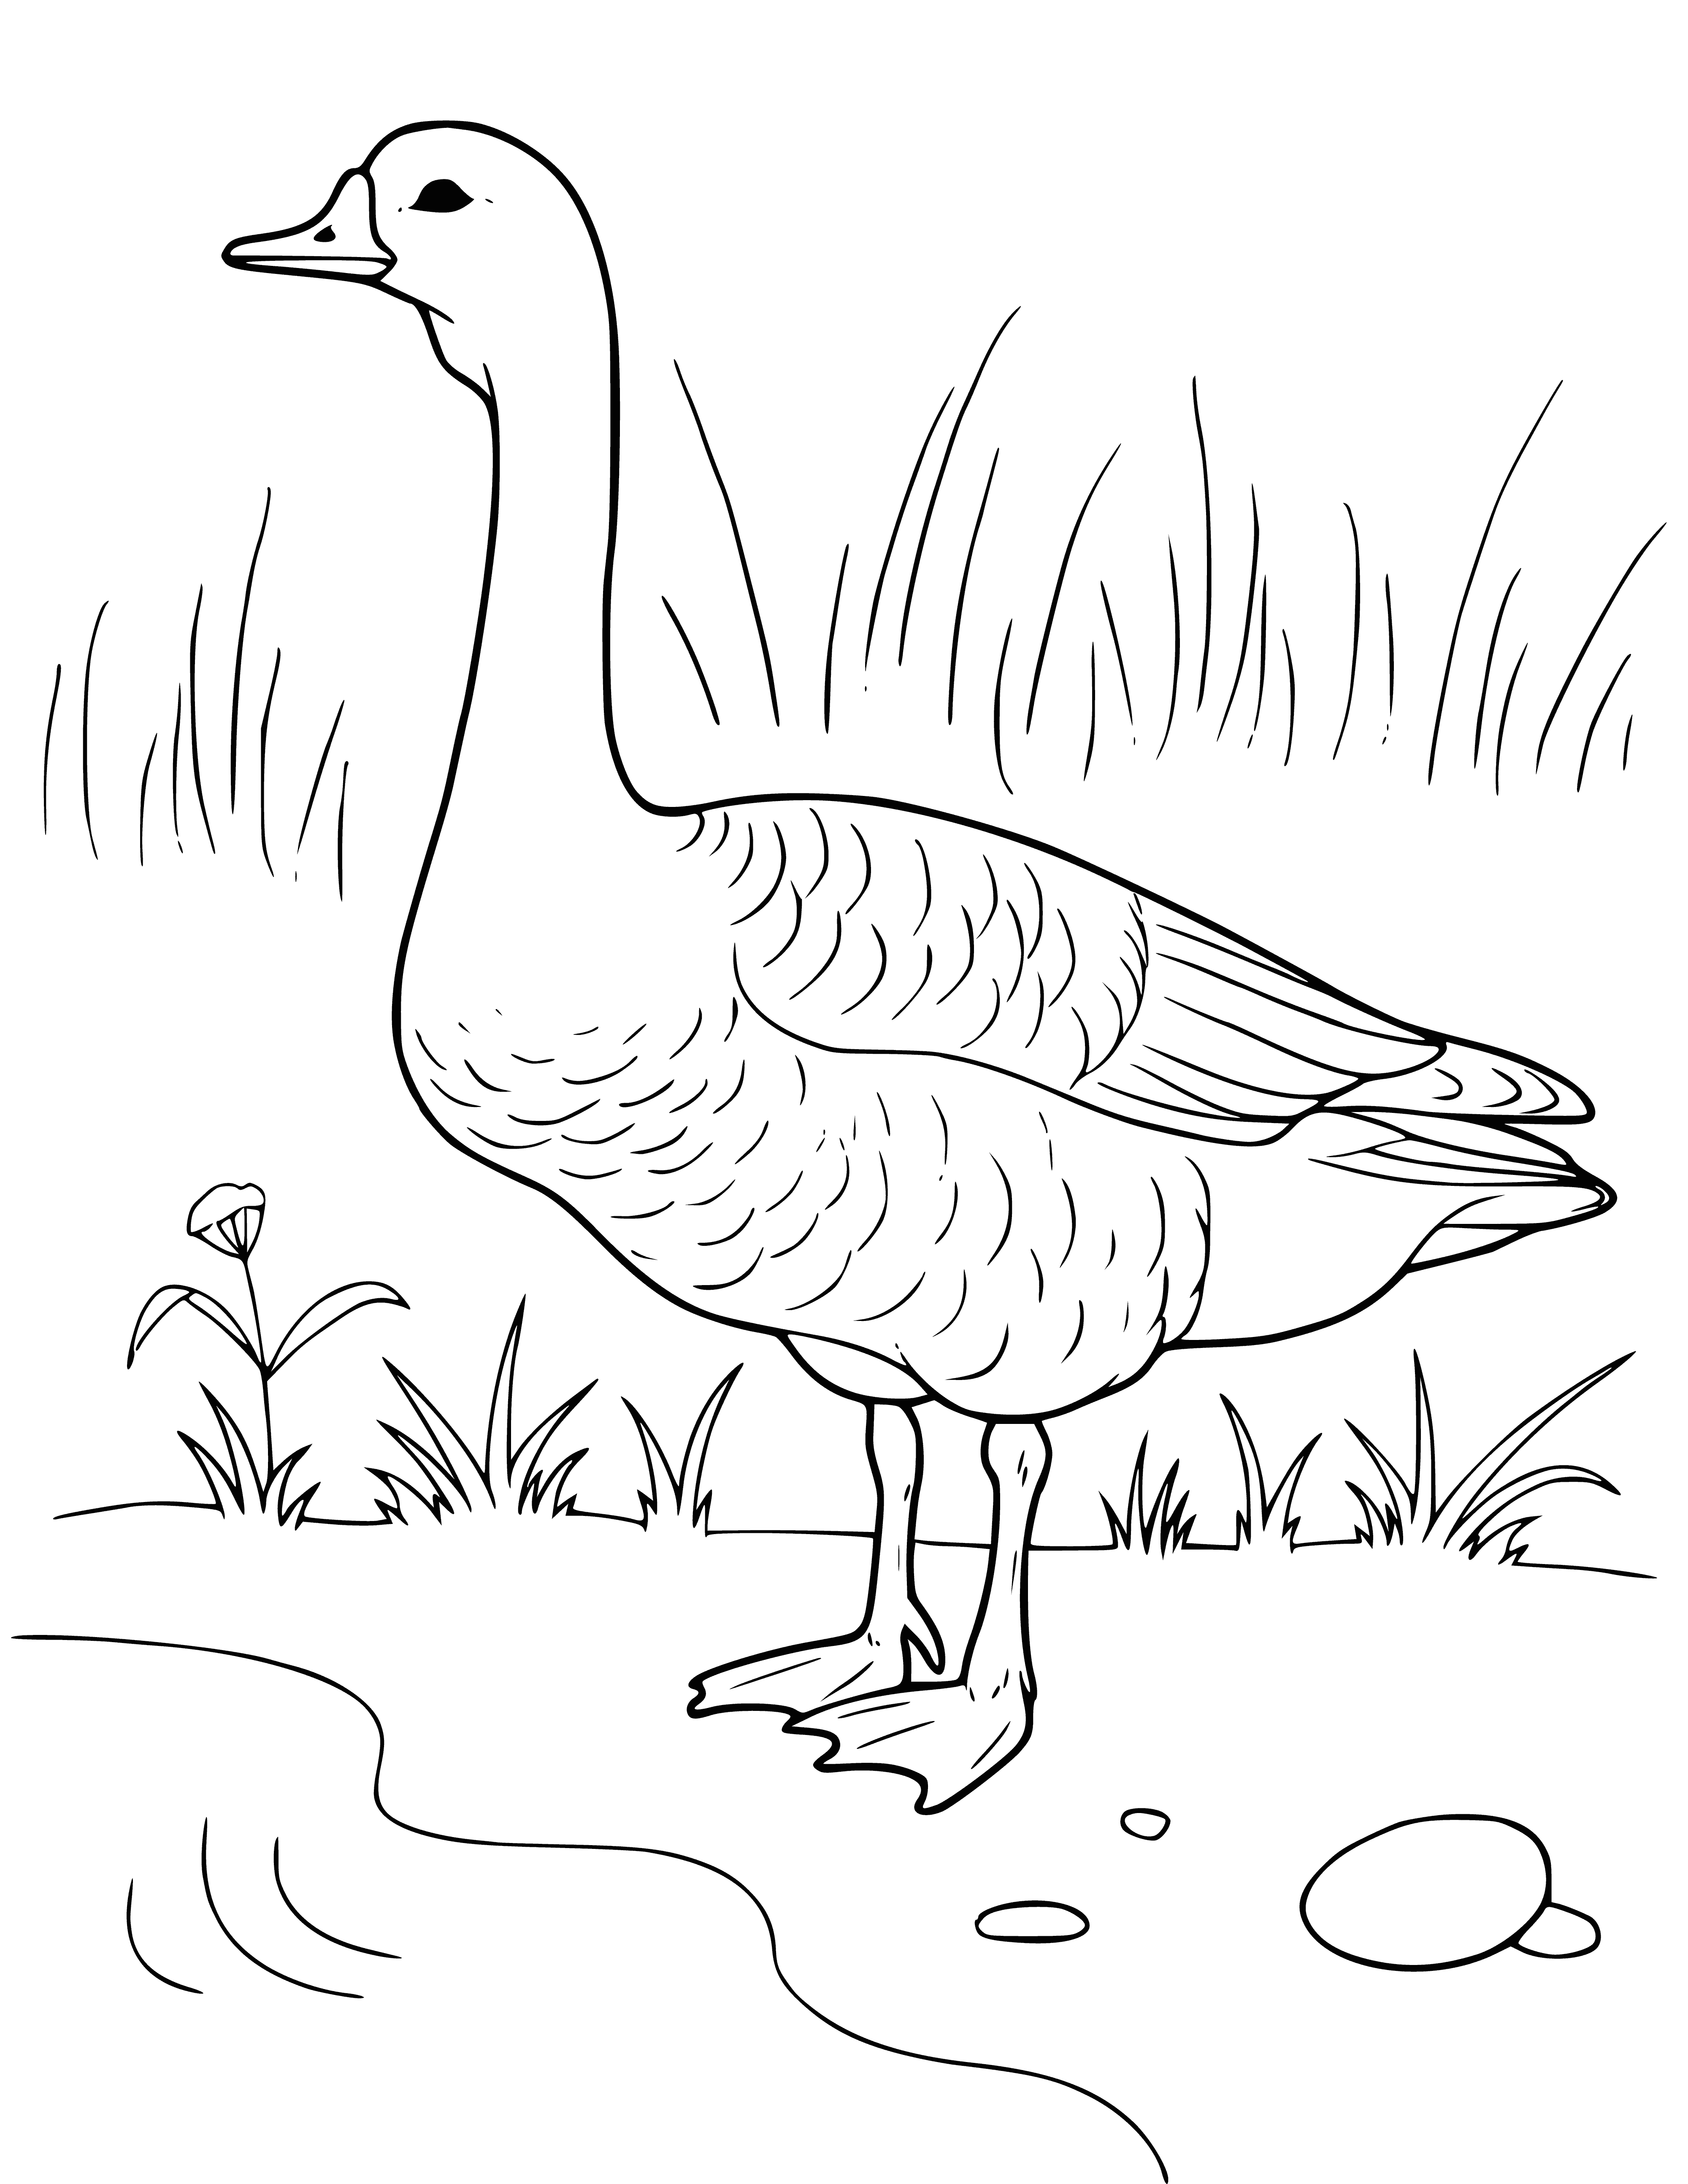 coloring page: Geese are popular waterfowl with a long neck, gray feathers, orange beak, long legs, and webbed feet. They honk loudly, can be kept as pets, and can even be trained to do tricks.